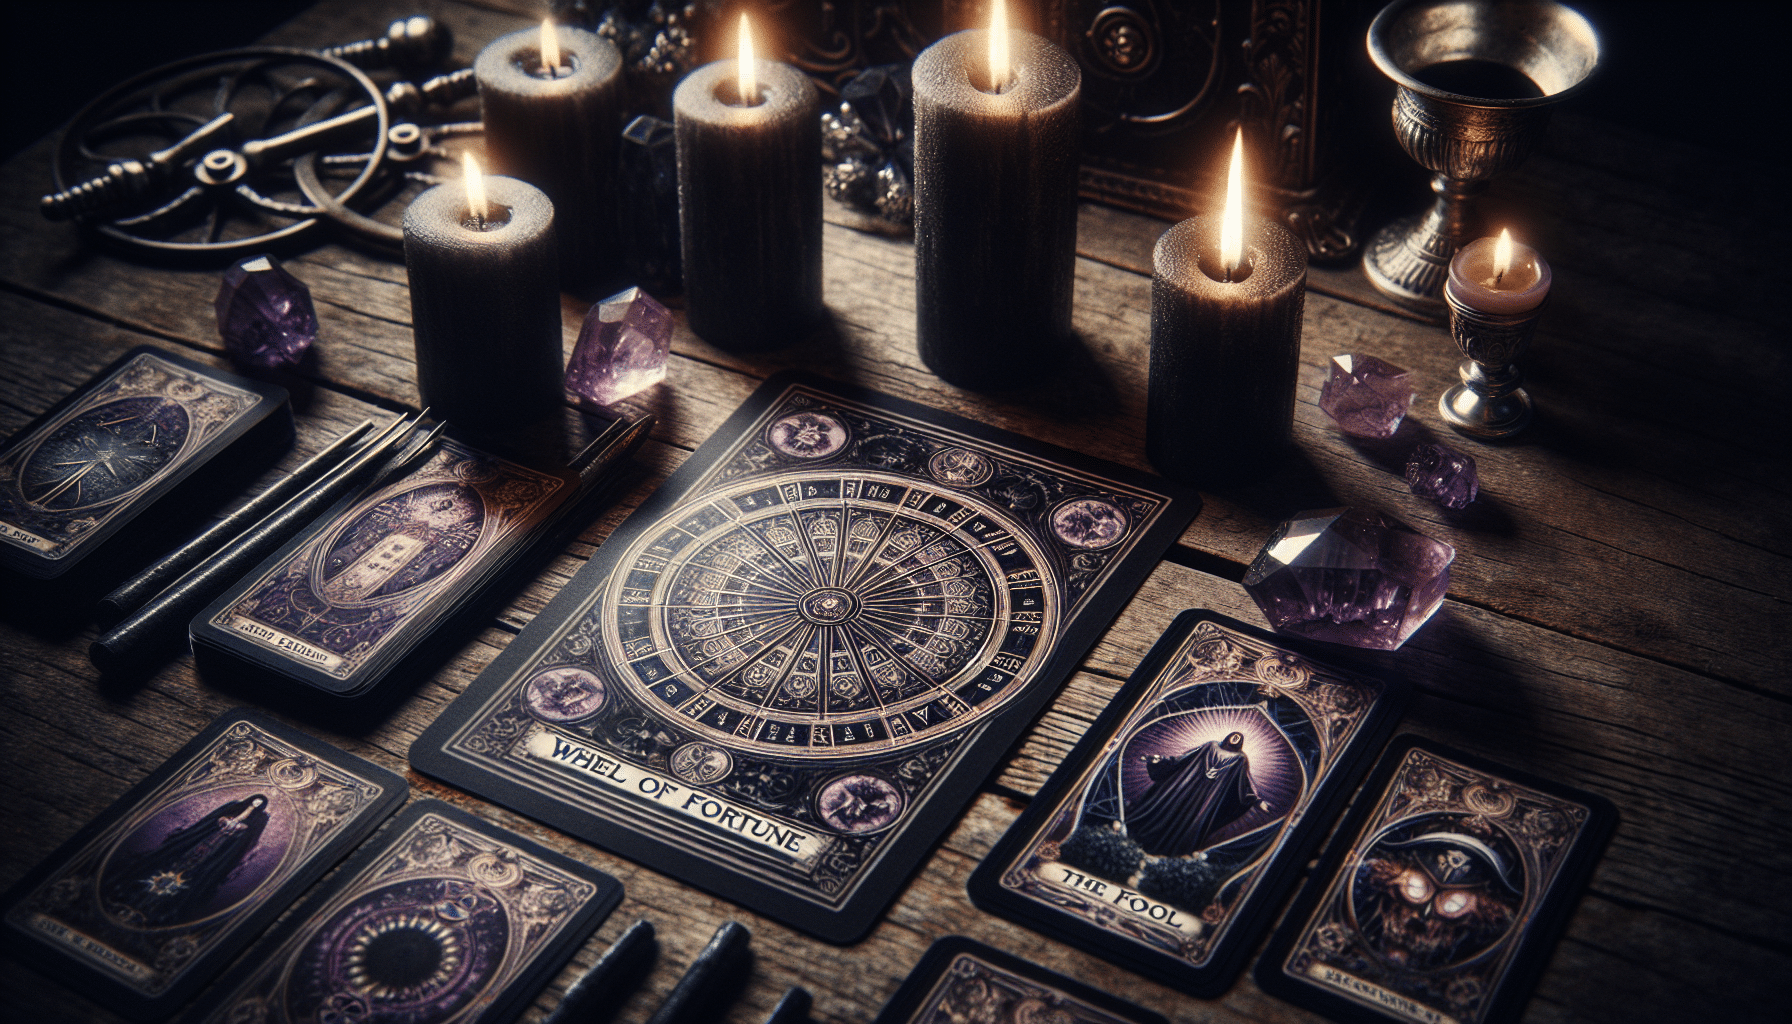 The Role of Tarot in Occult History